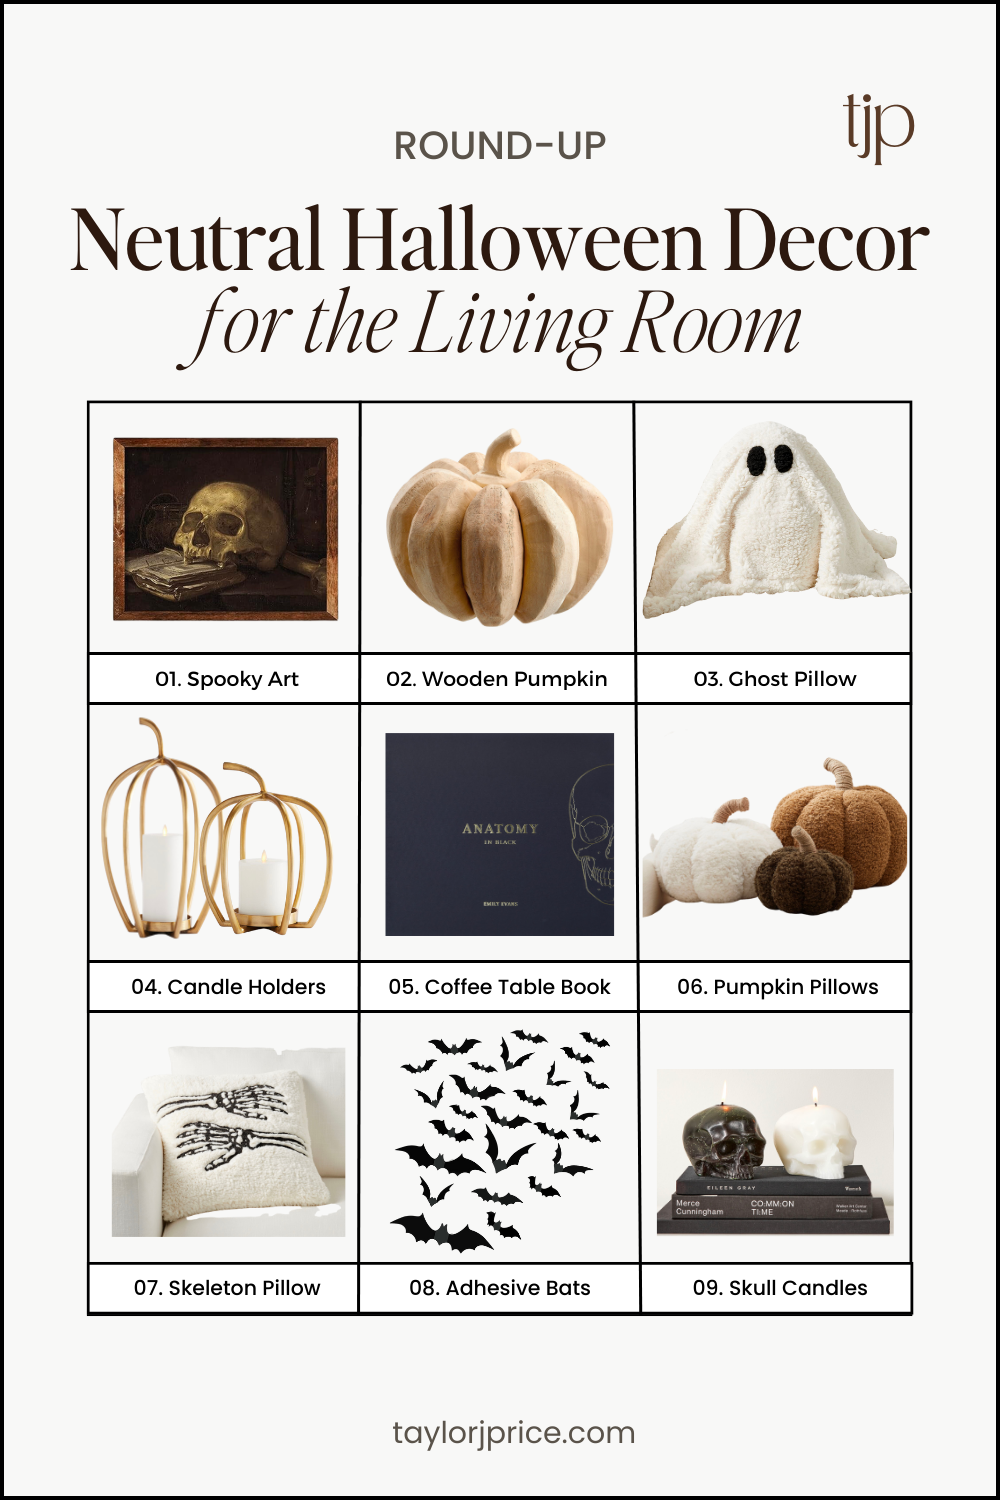 Neutral Halloween Decor for the living room: spooky art, wooden pumpkin, ghost throw pillow, pumpkin candle holders, black coffee table book, pumpkin throw pillows, skeleton hands throw pillow, adhesive bats, skull candles